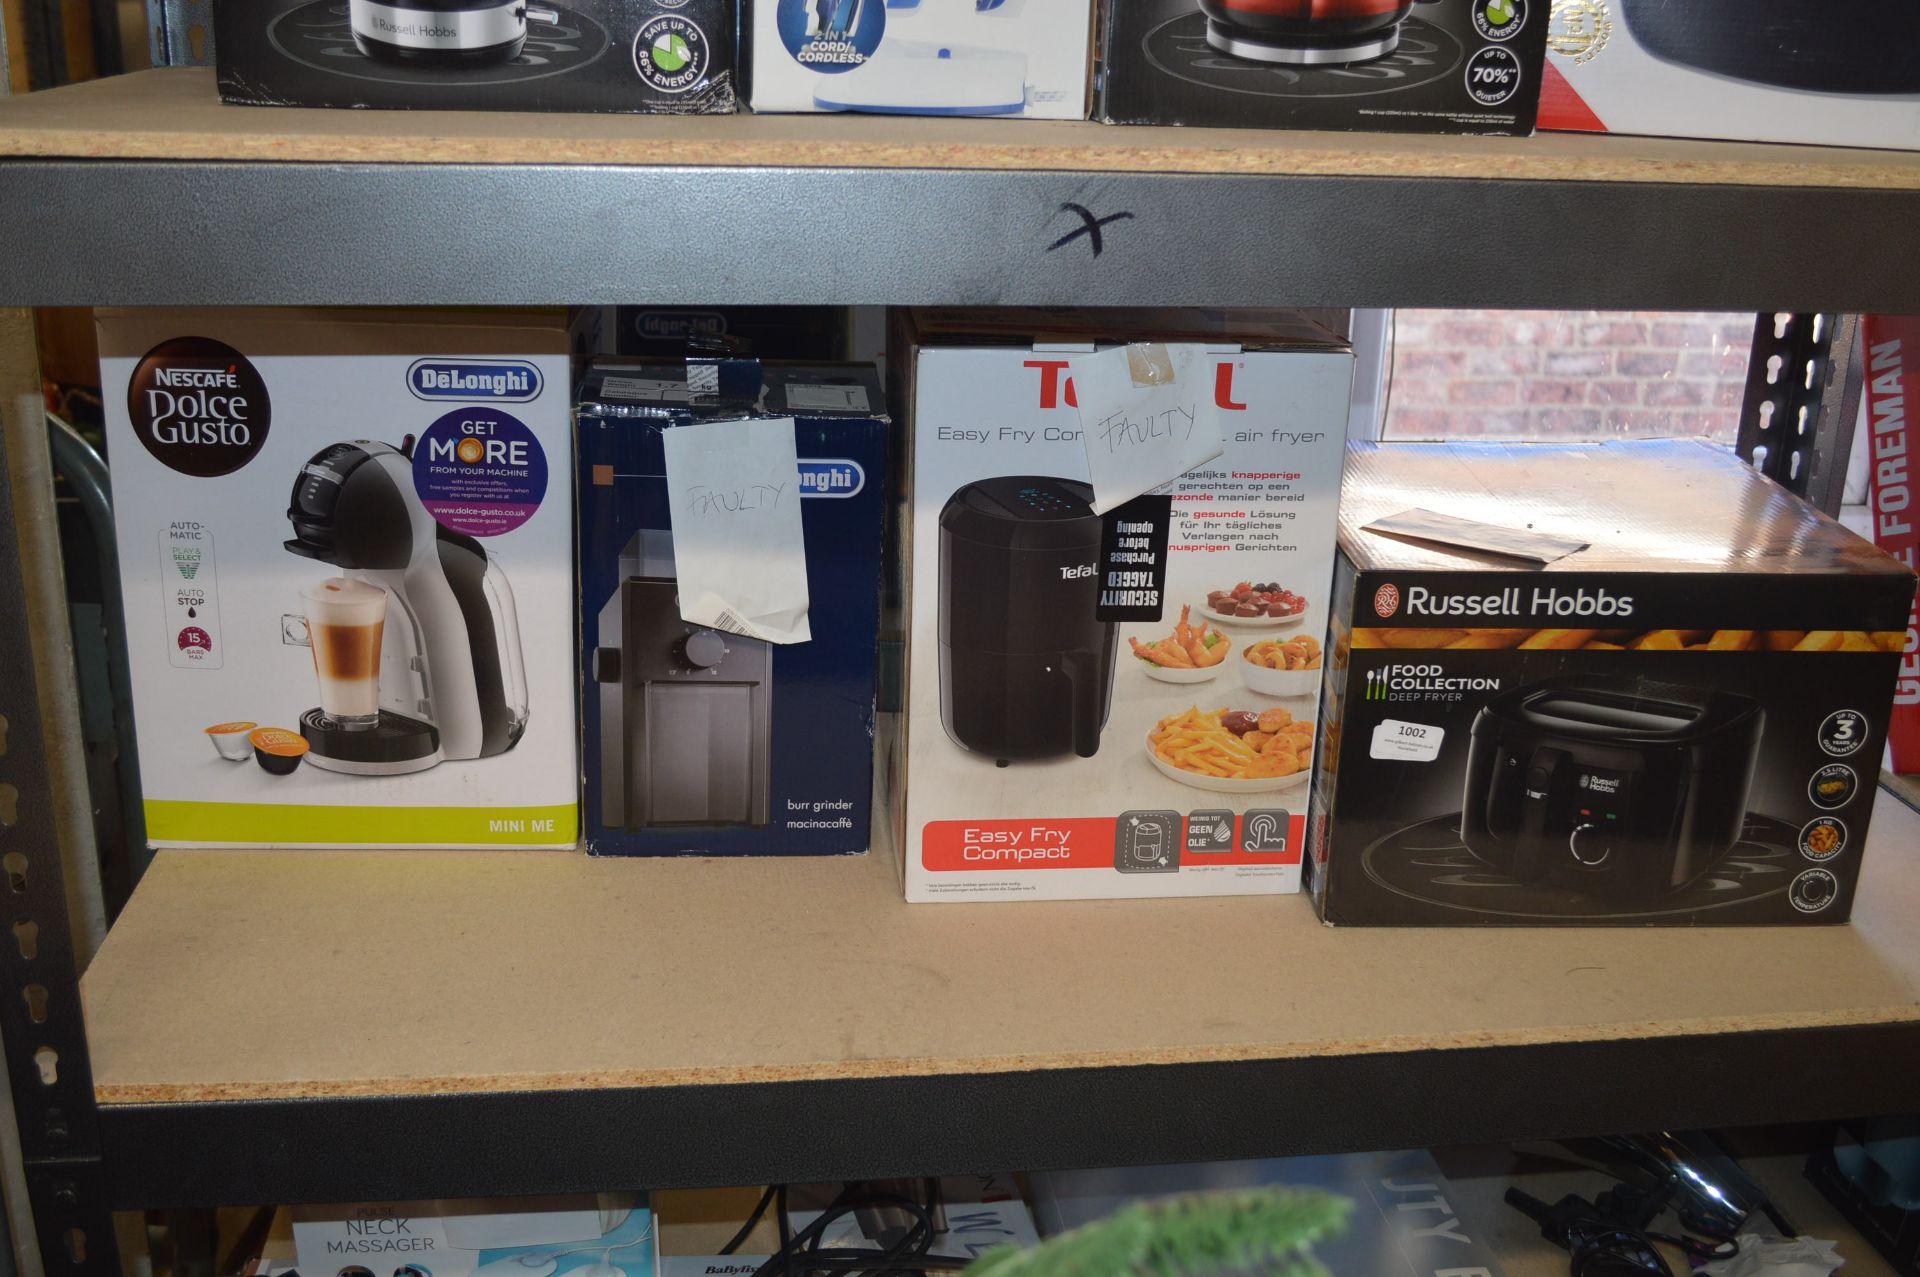 *Delonghi Coffee Machine and Grinder plus Tefal Fryer and Russell Hobbs Fryer (salvage)